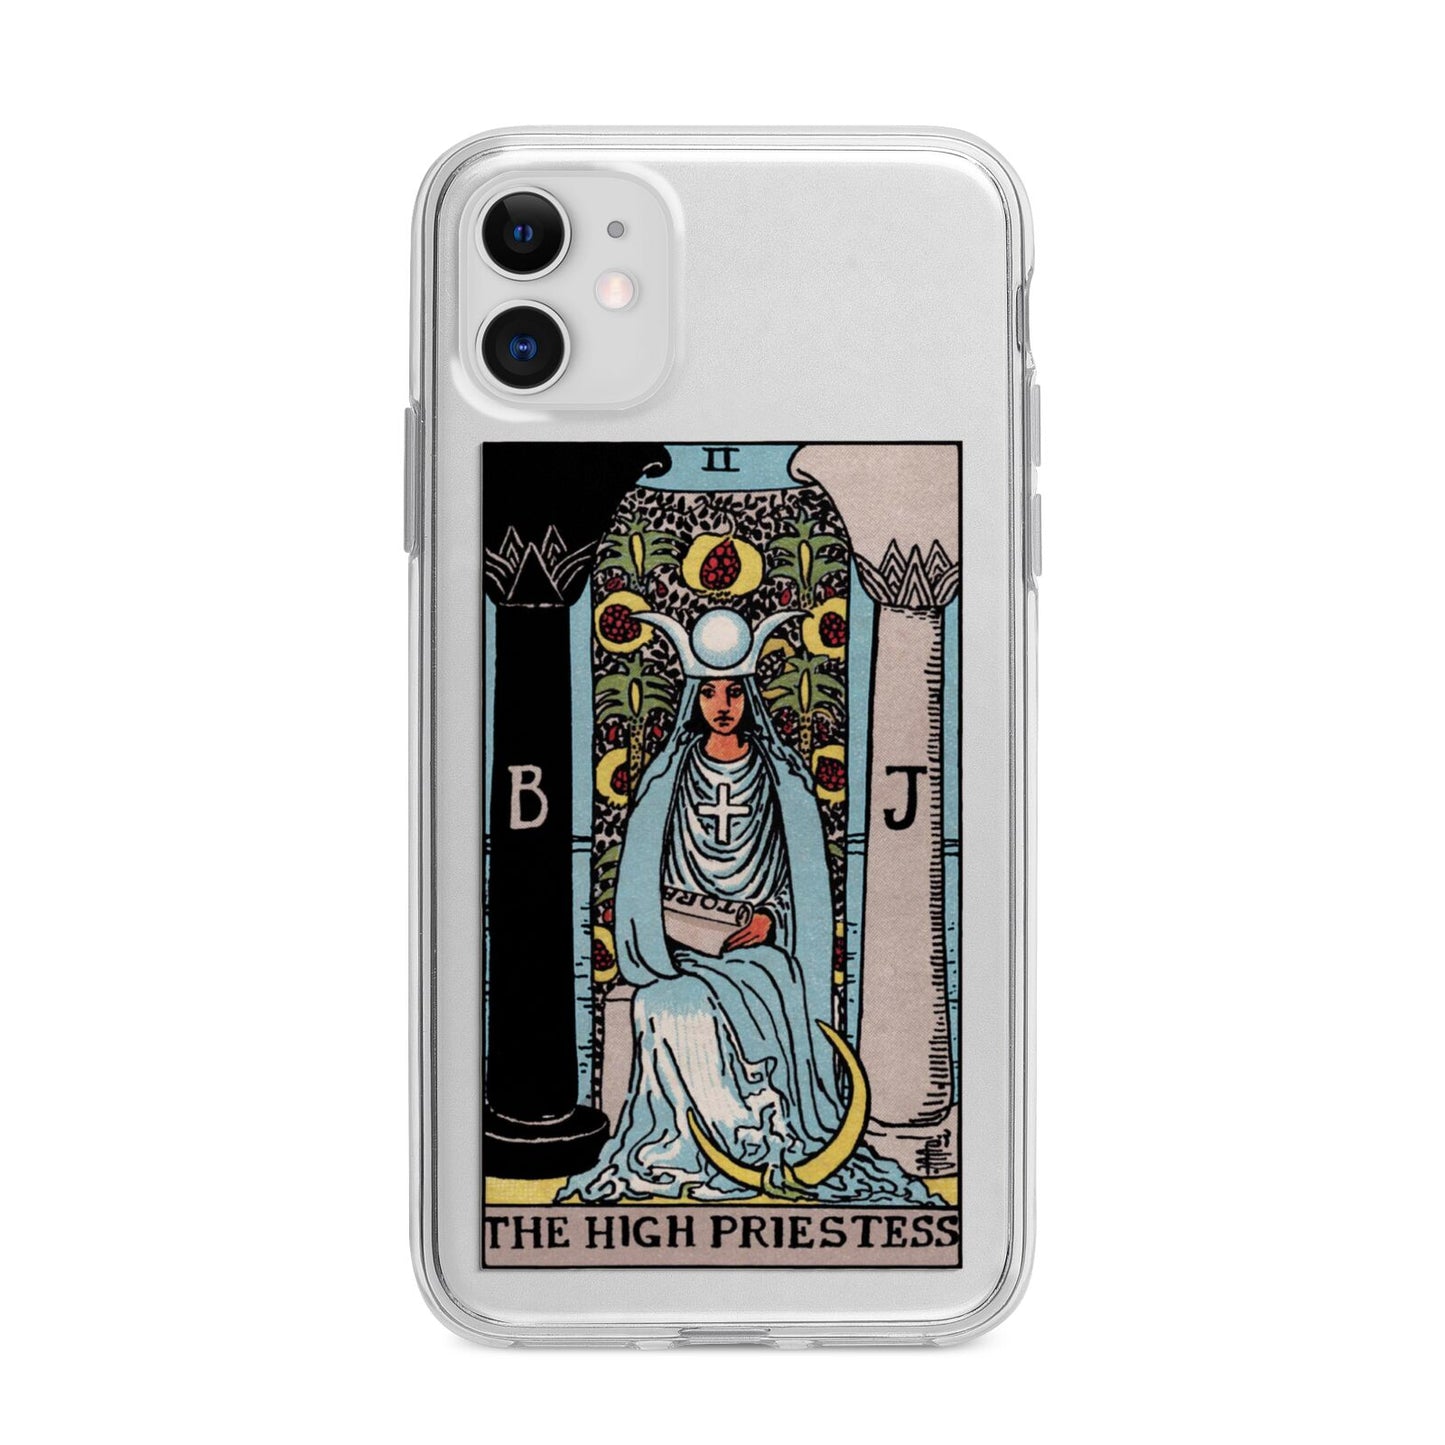 The High Priestess Tarot Card Apple iPhone 11 in White with Bumper Case